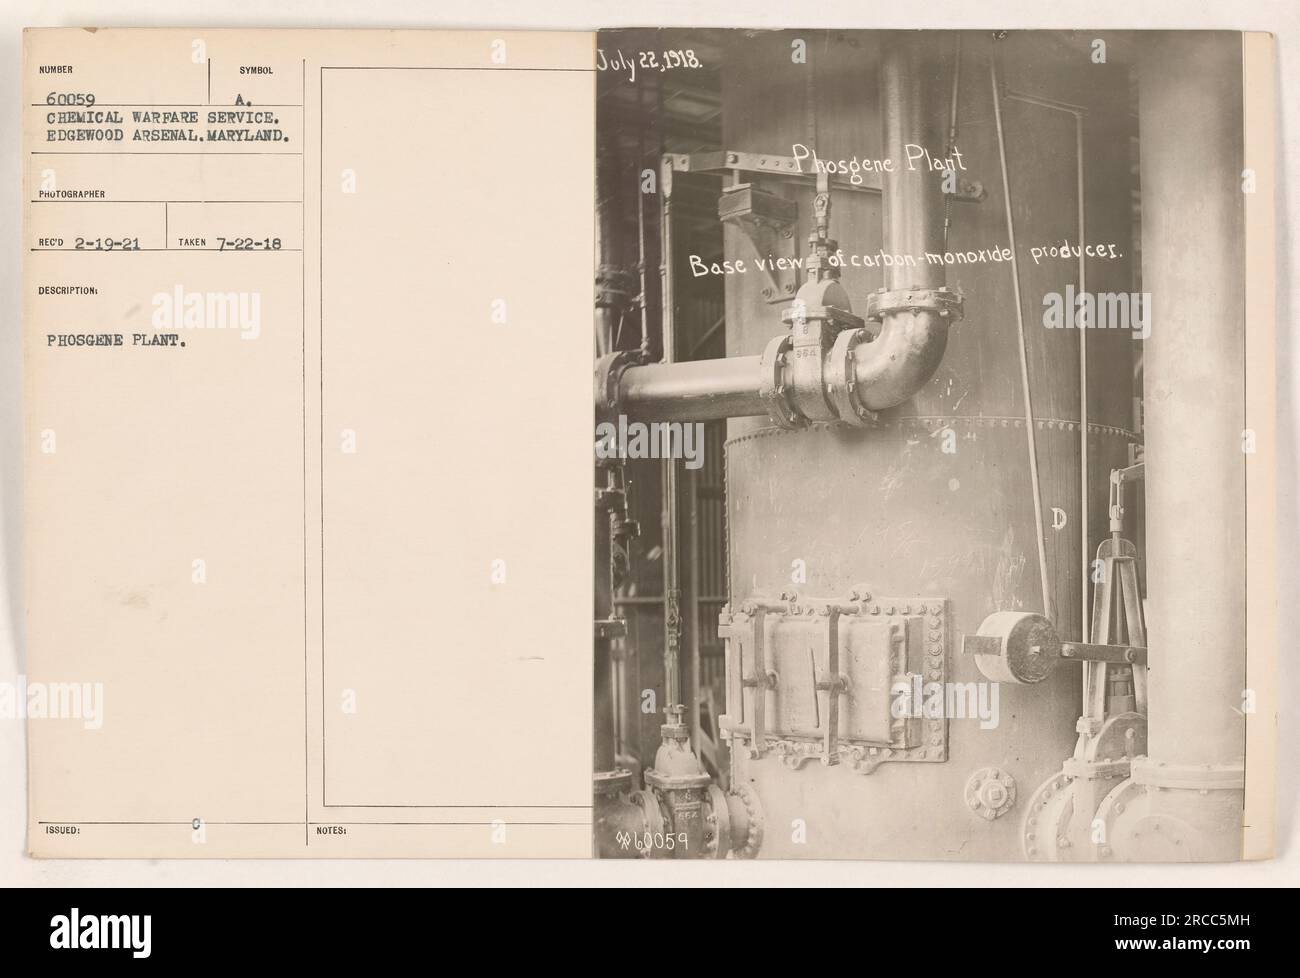 Image showing a base view of the Phosgene plant at Edgewood Arsenal in Maryland. The plant is a symbol of the Chemical Warfare Service. The photograph was taken on July 22, 1918, and indicates that it was issued. The image shows the carbon-monoxide producer for the Phosgene plant. Stock Photo